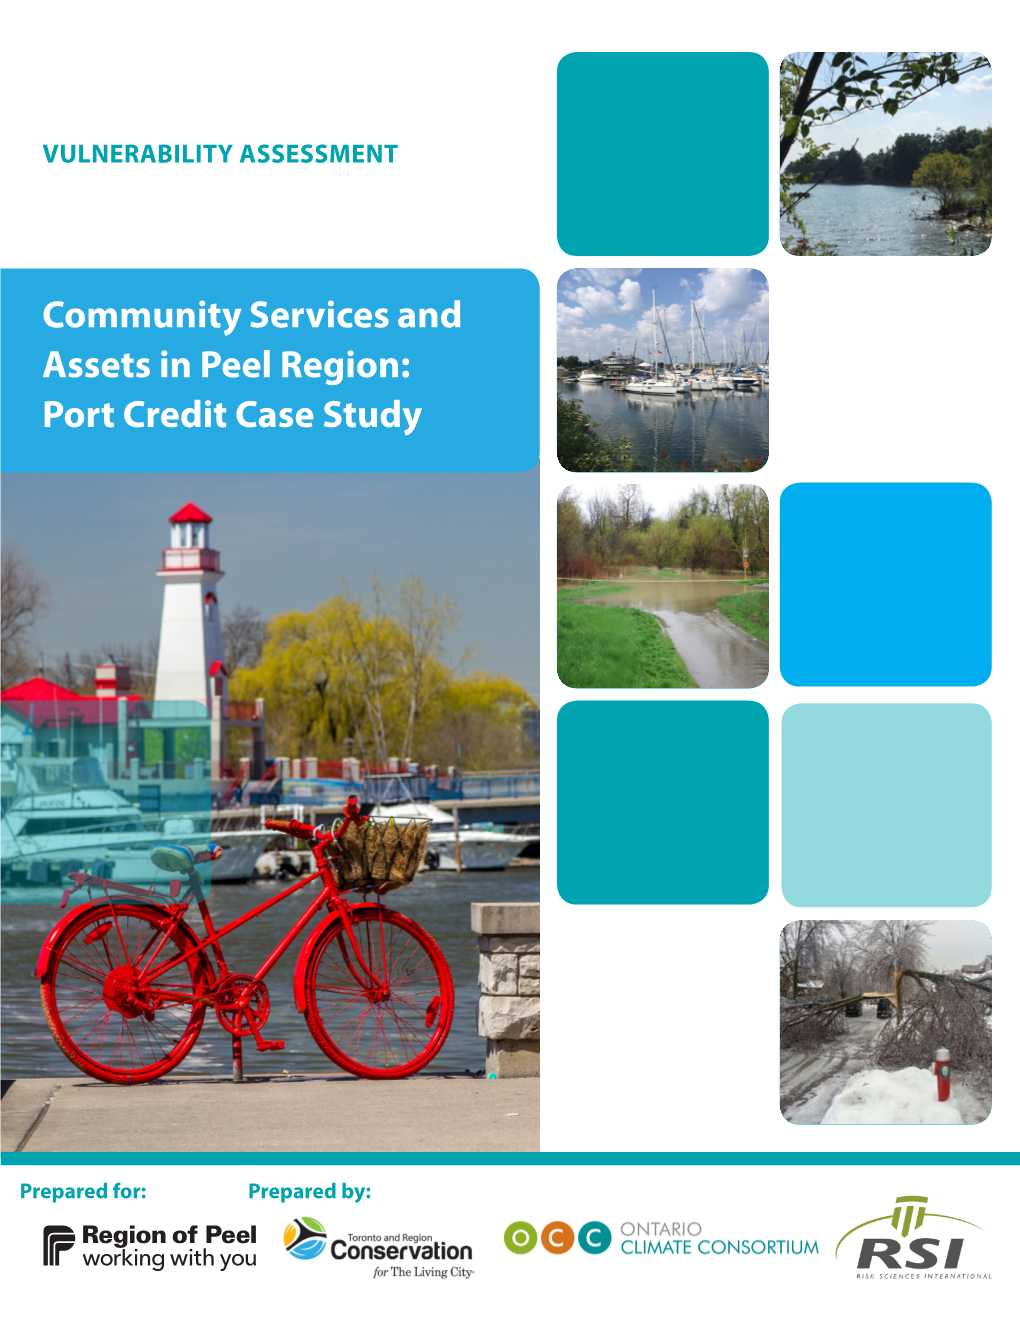 Community Services and Assets in Peel Region: Port Credit Case Study